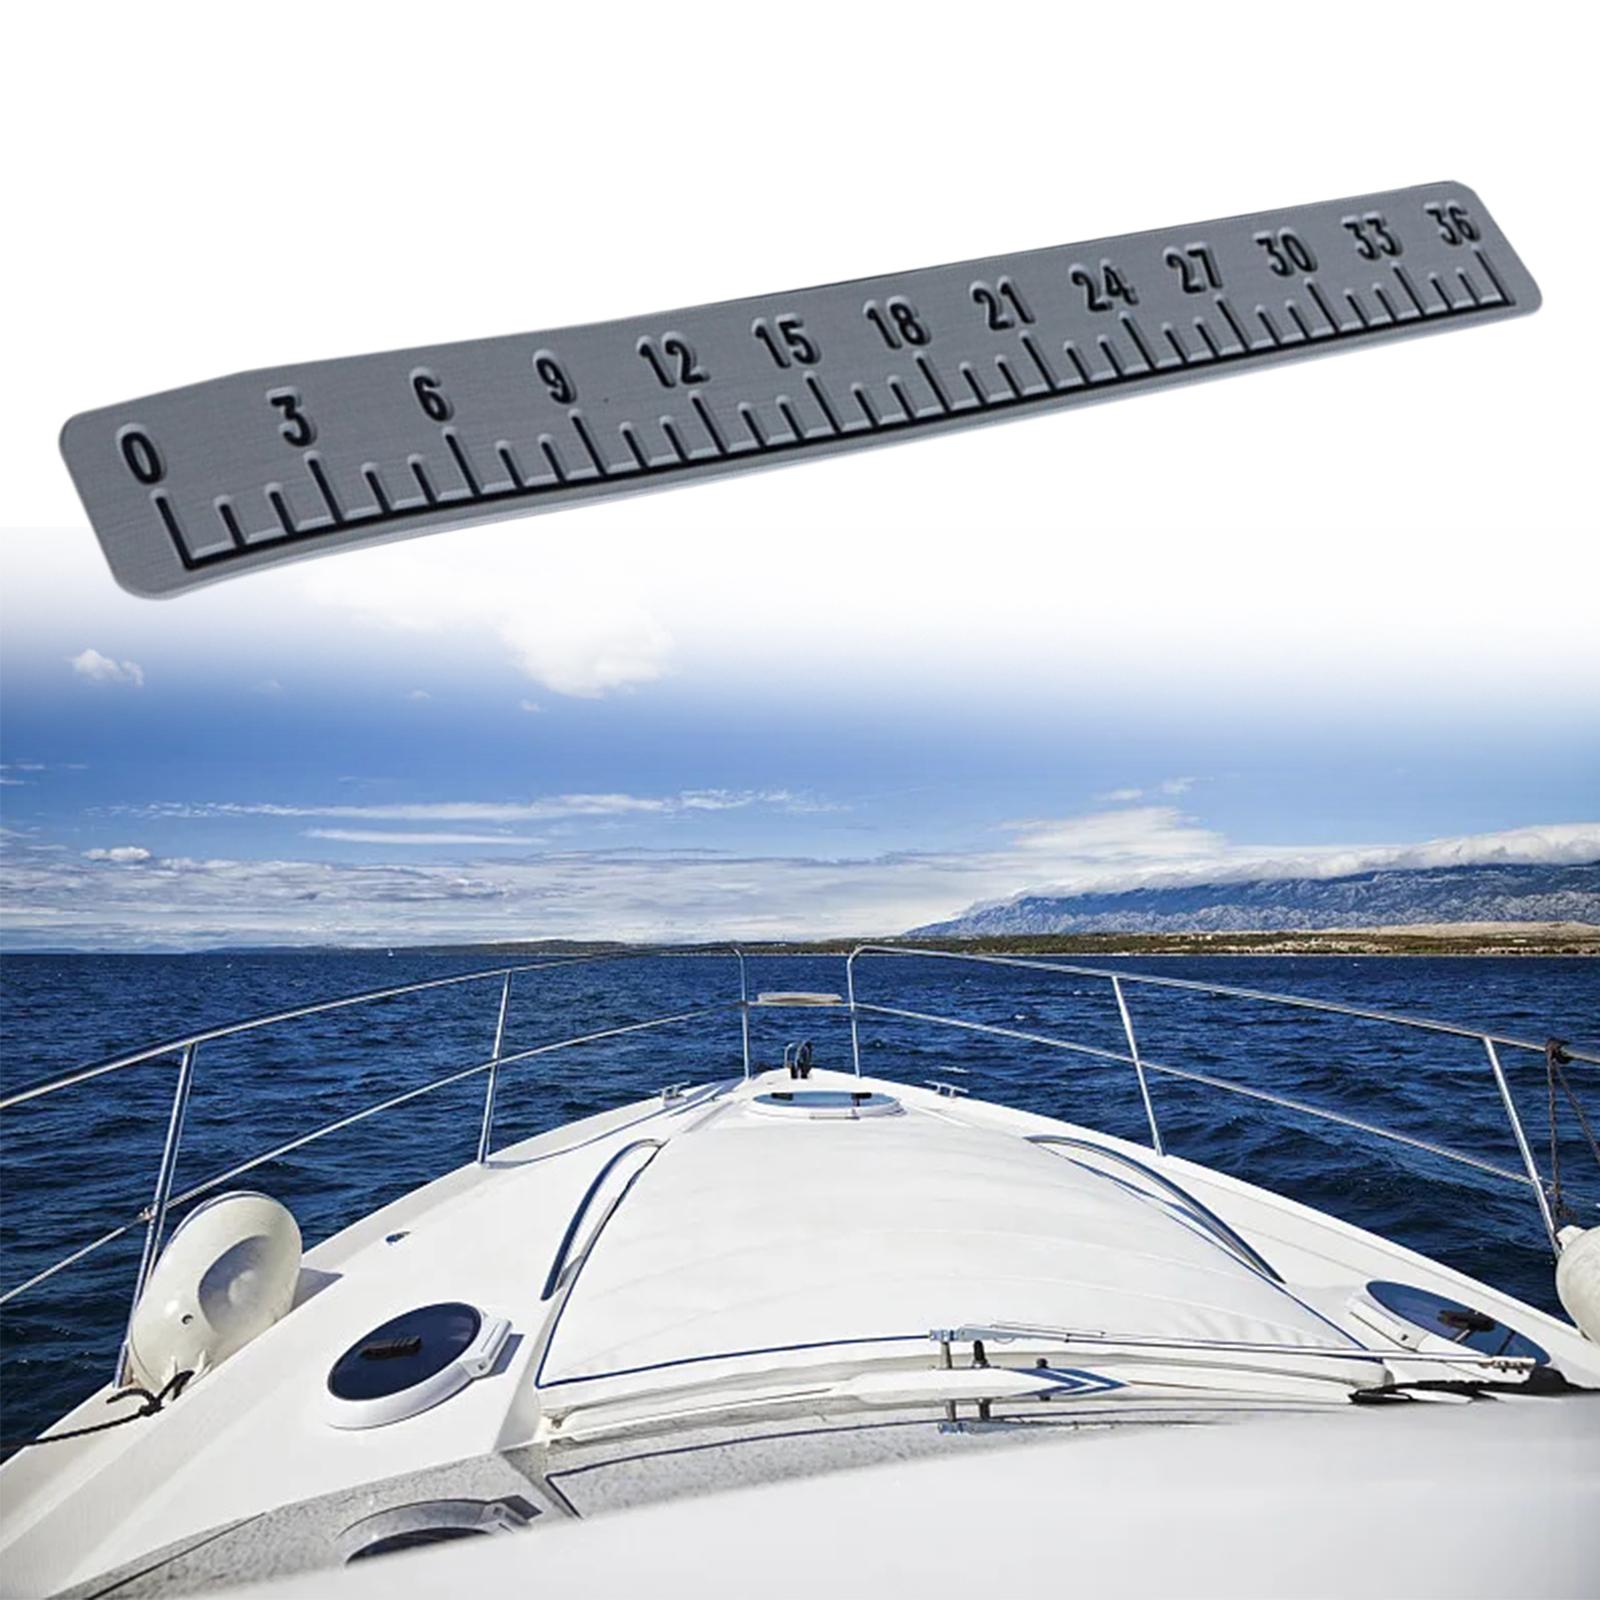 39" Fish Ruler for Boat Accurate 6mm Thickness High Density for Sailboats light gray black